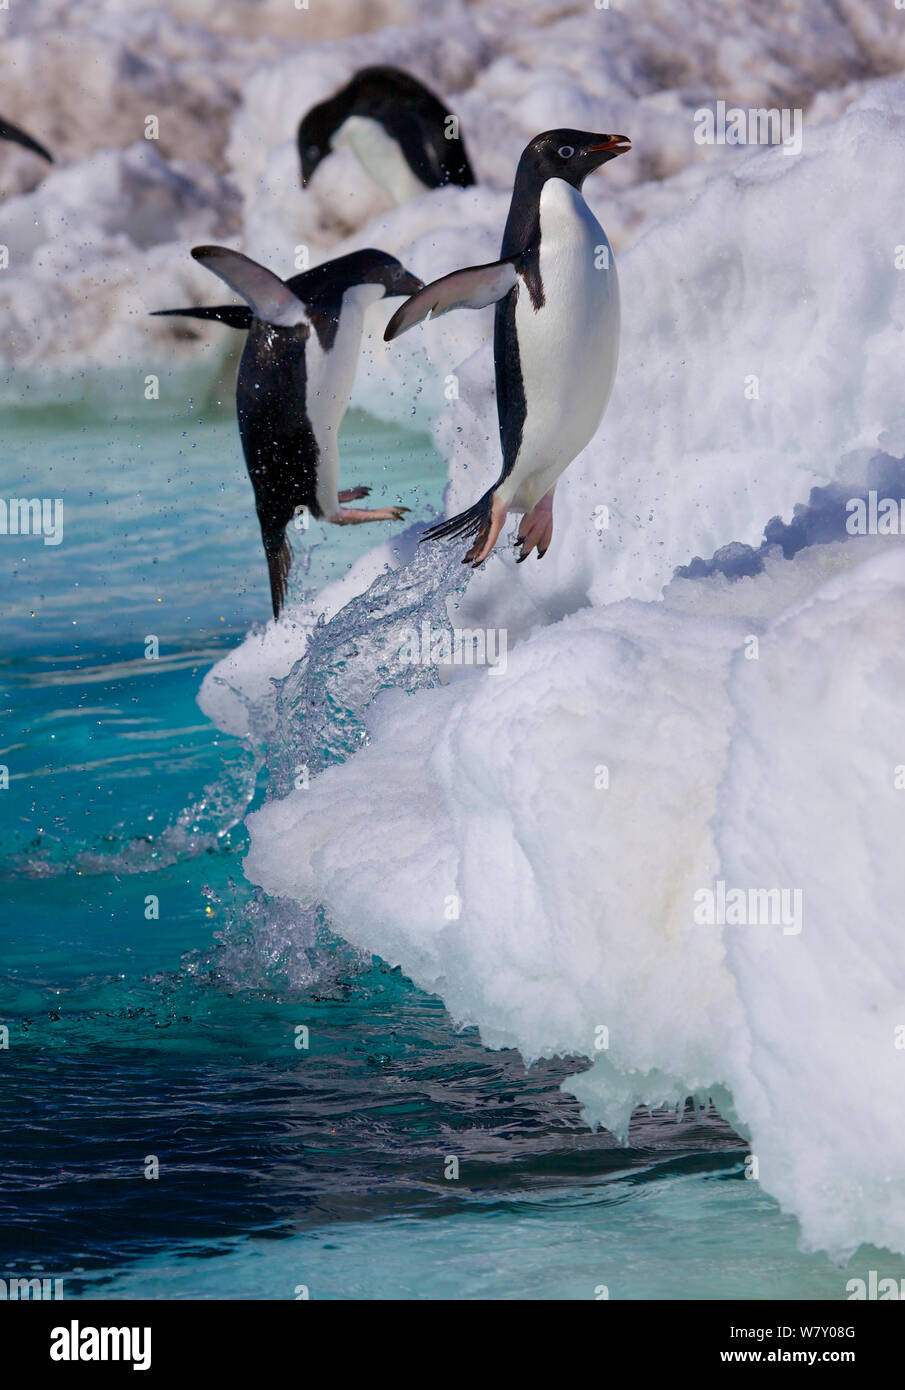 Adelie penguin (Pygoscelis adeliae) jumping out of the water, Antarctica. Stock Photo